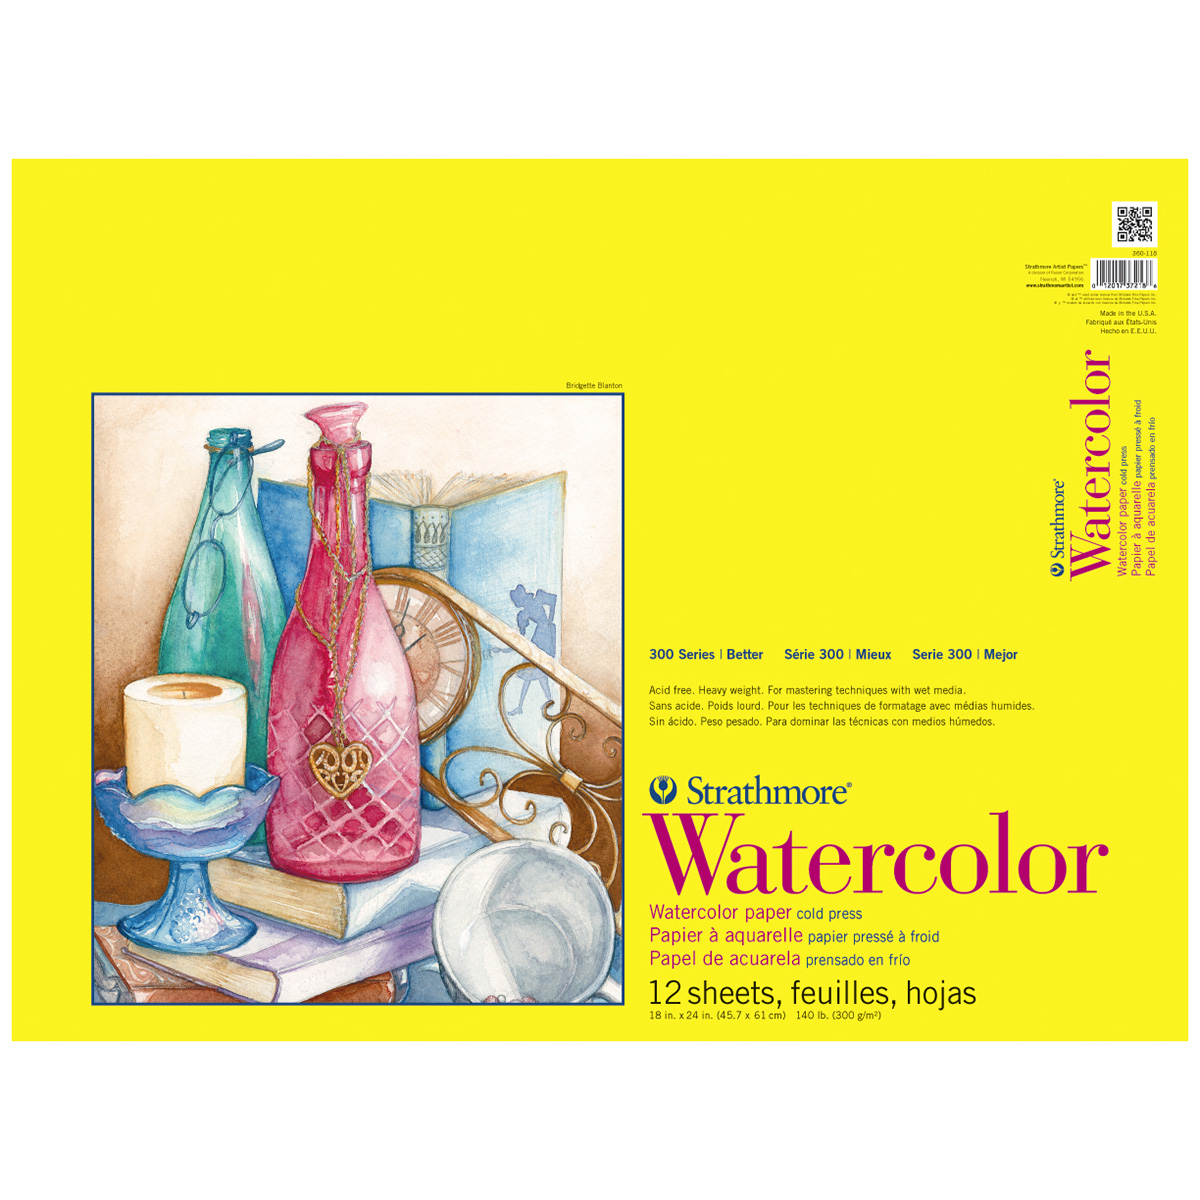 Removing Sheets from Watercolor Blocks - Strathmore Artist Papers